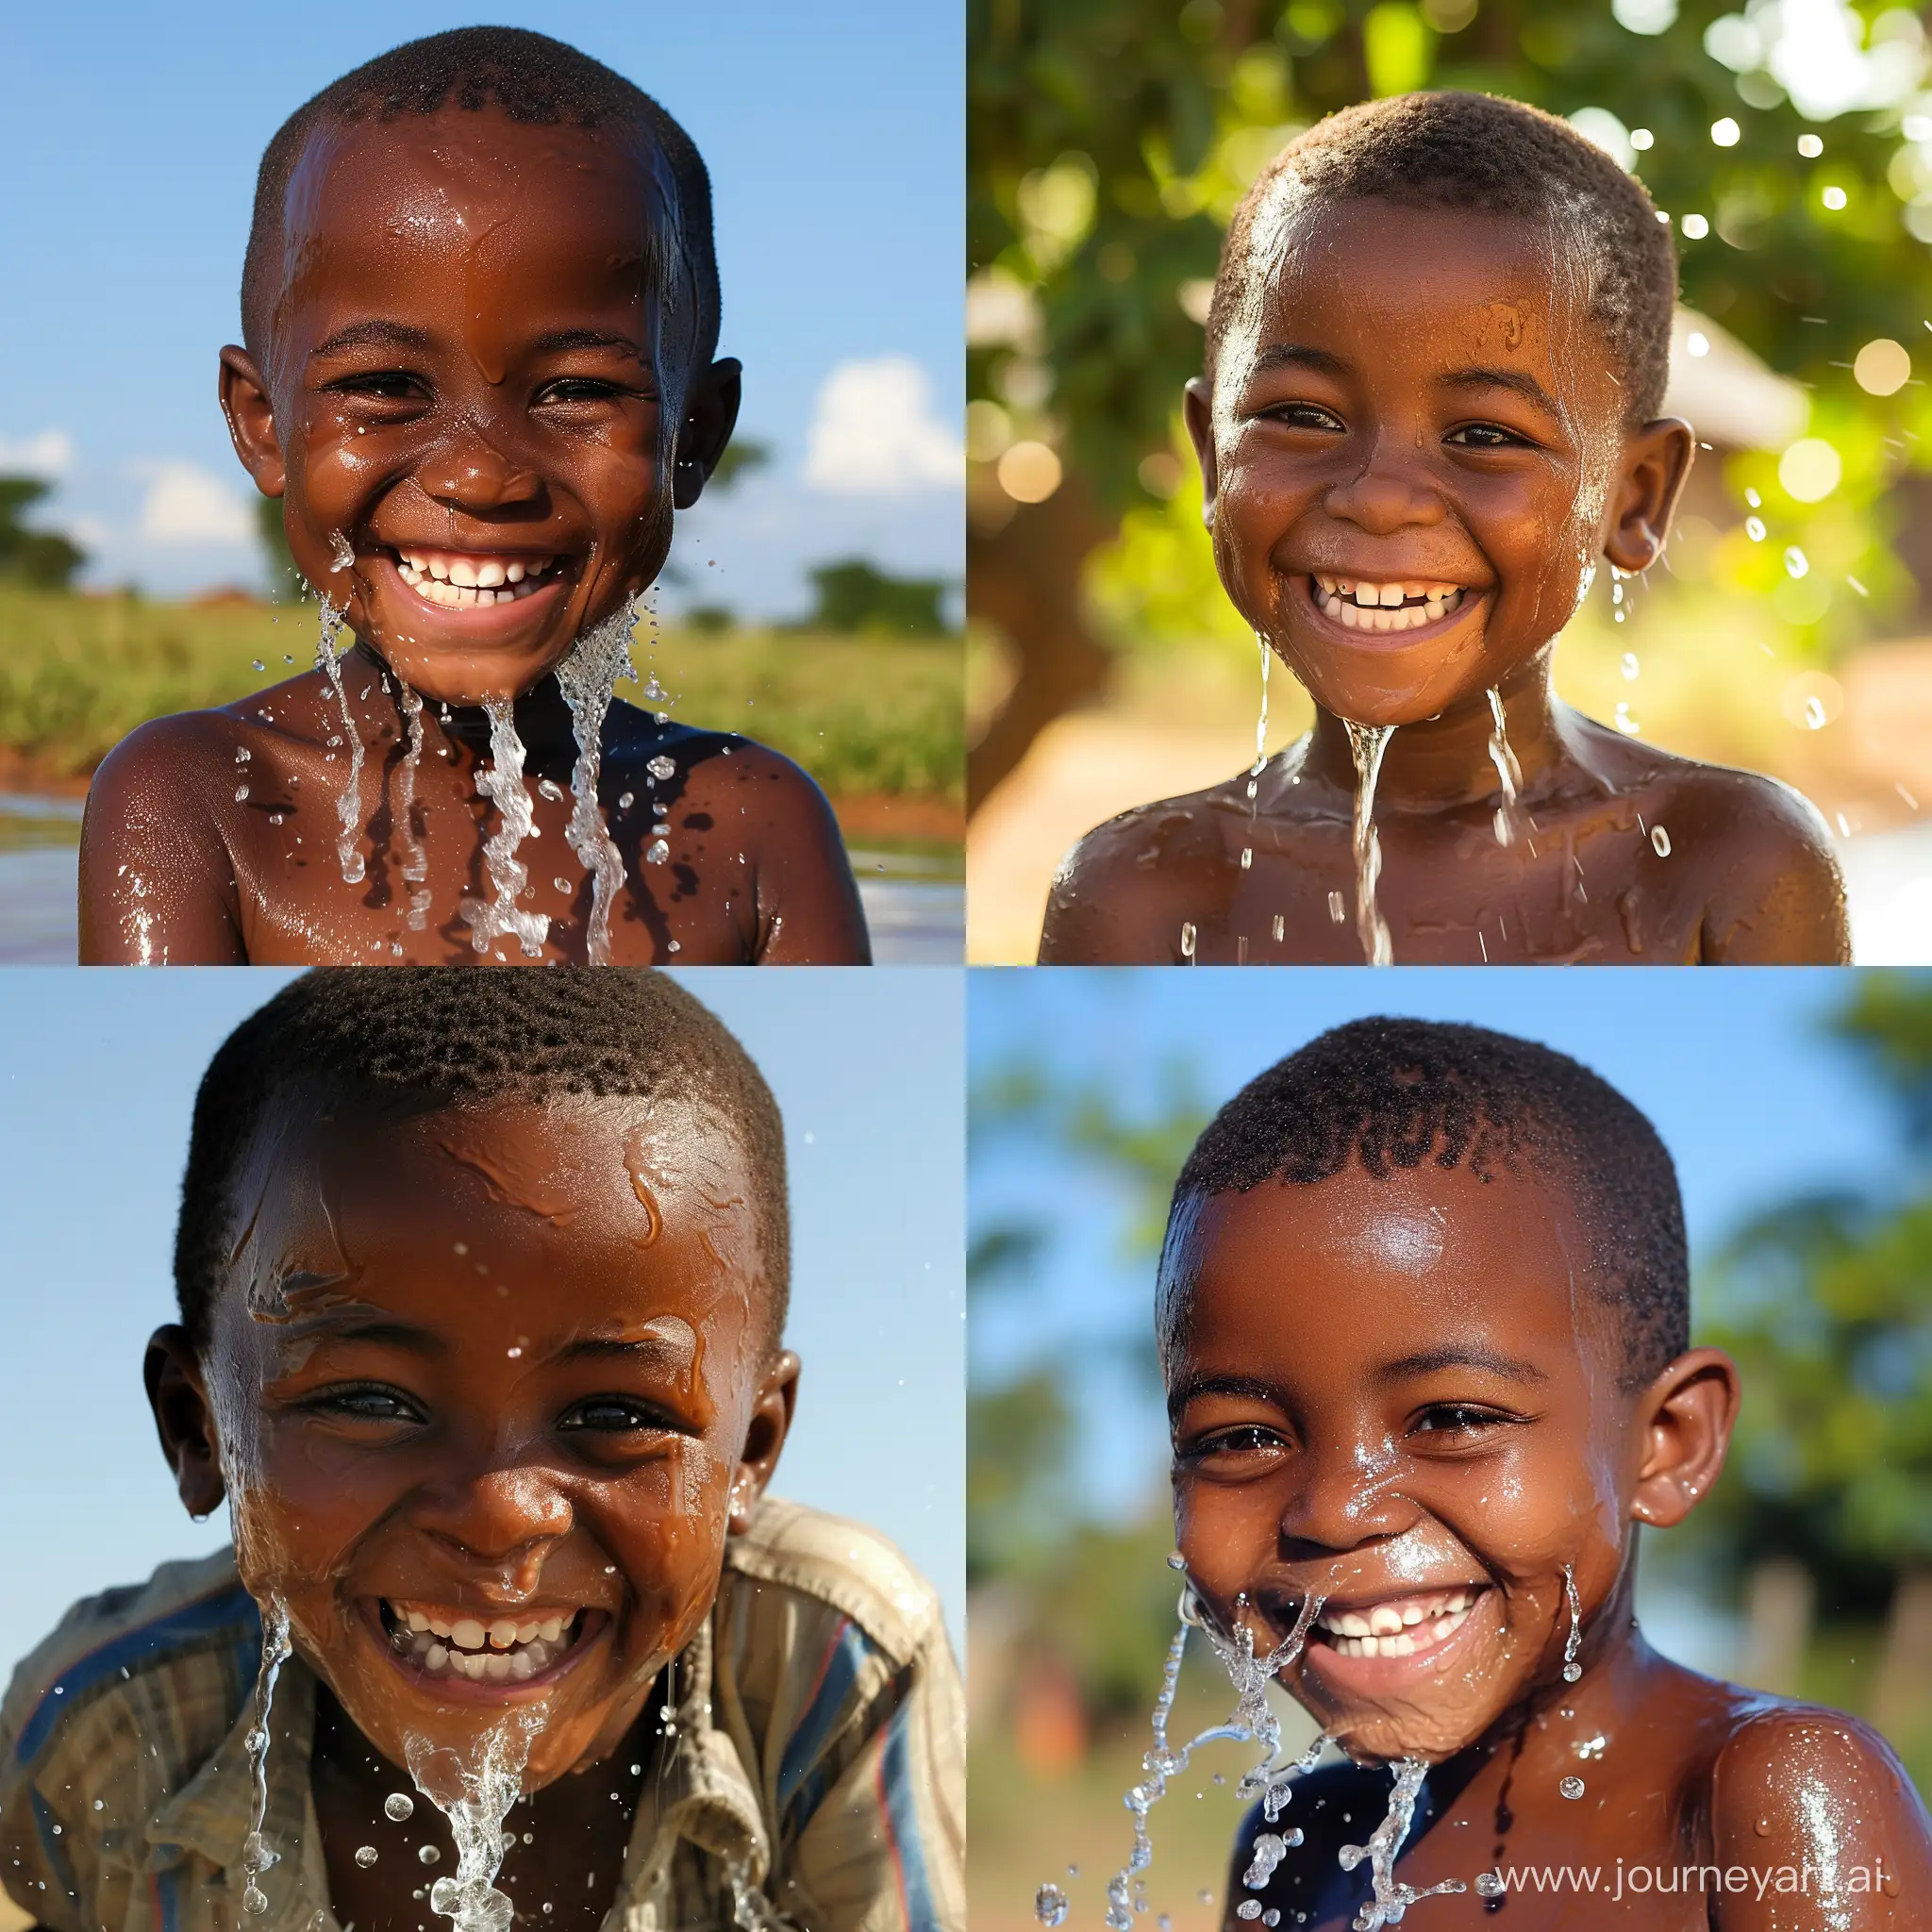 Joyful-African-Boy-Smiling-with-Water-Play-on-a-Sunny-Day